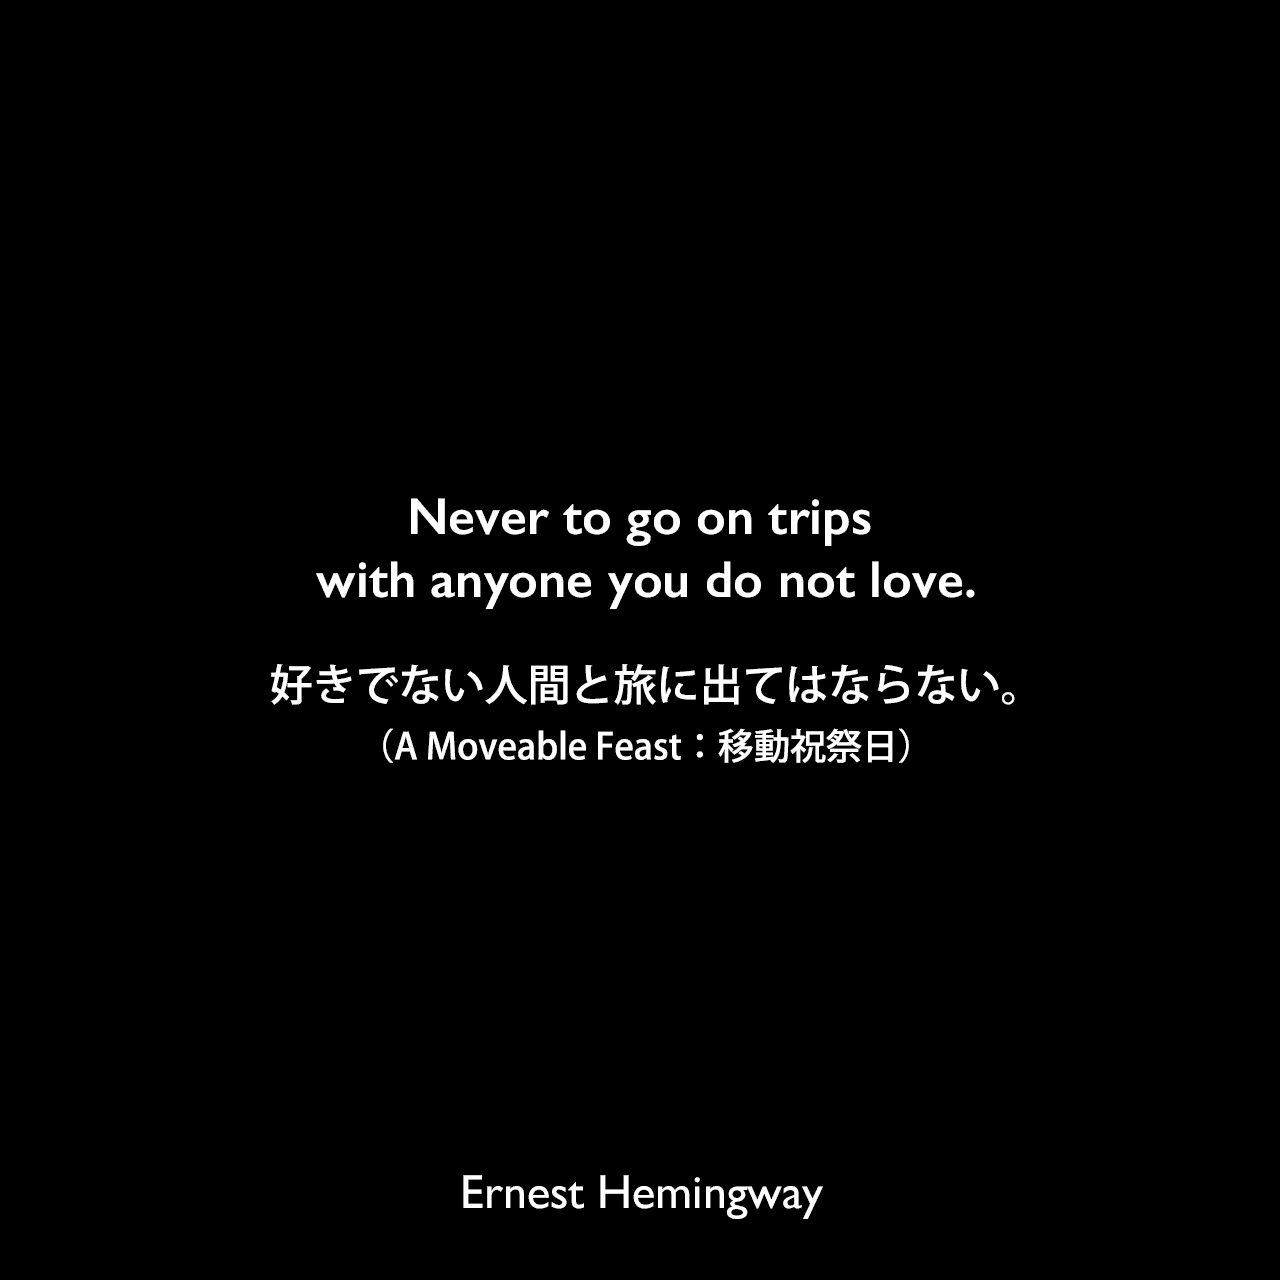 Never to go on trips with anyone you do not love.好きでない人間と旅に出てはならない。（A Moveable Feast：移動祝祭日）Ernest Hemingway